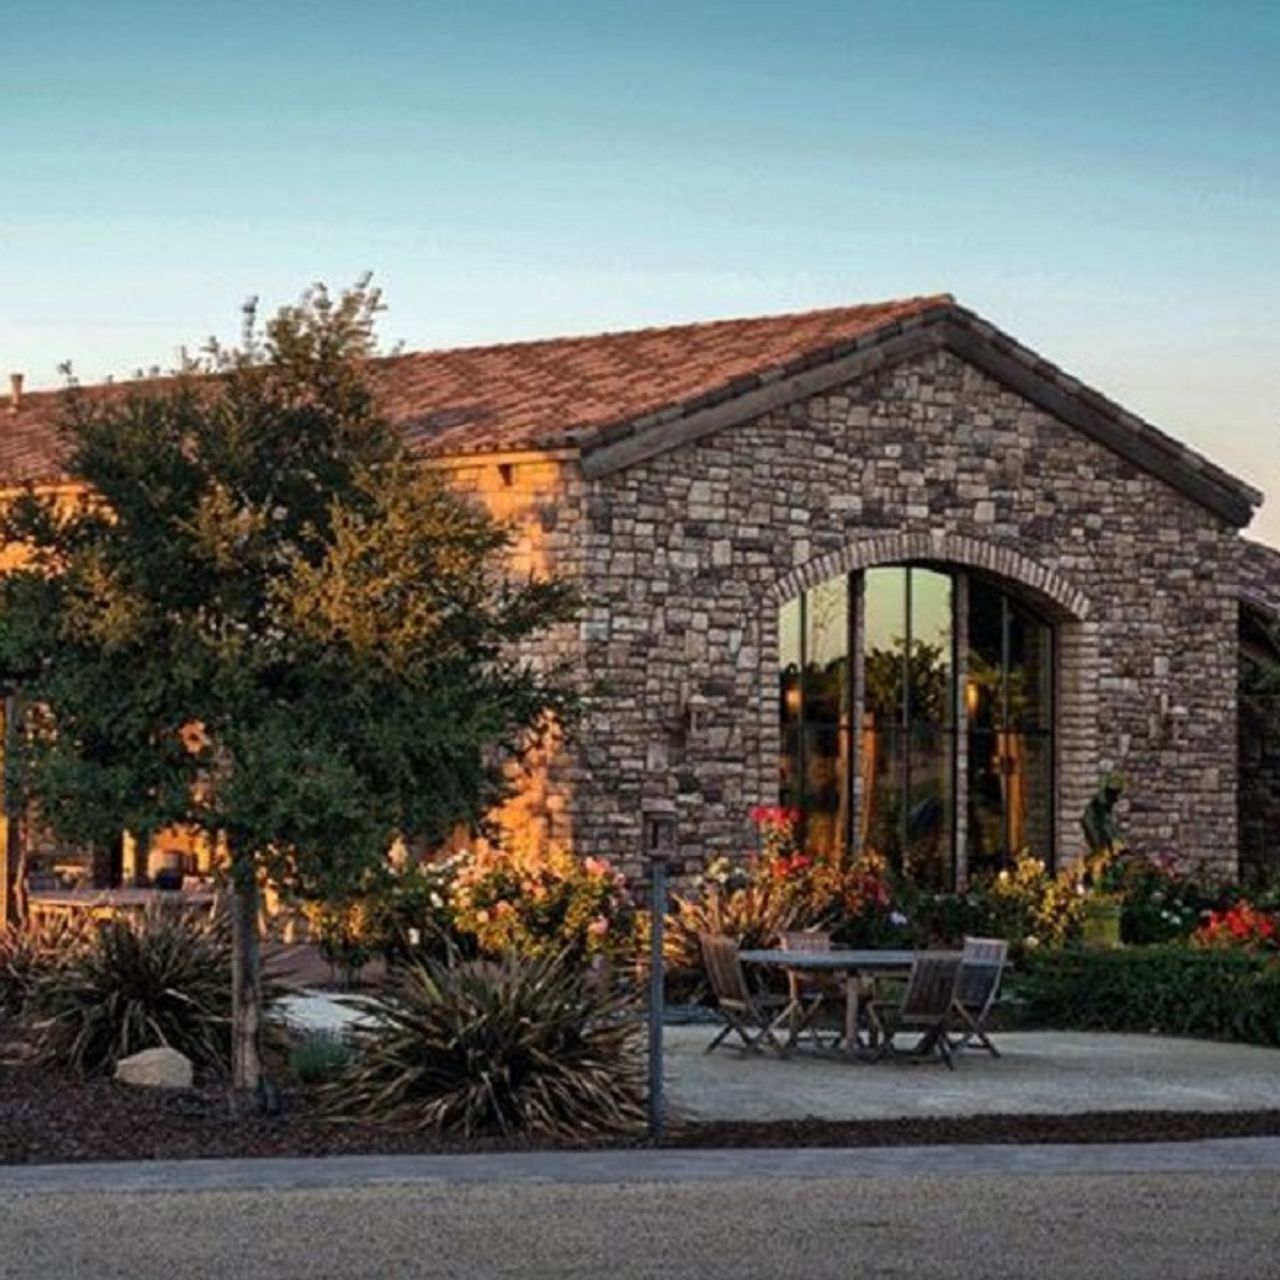 Pear Valley Estate Wine Restaurant - Paso Robles, CA | OpenTable